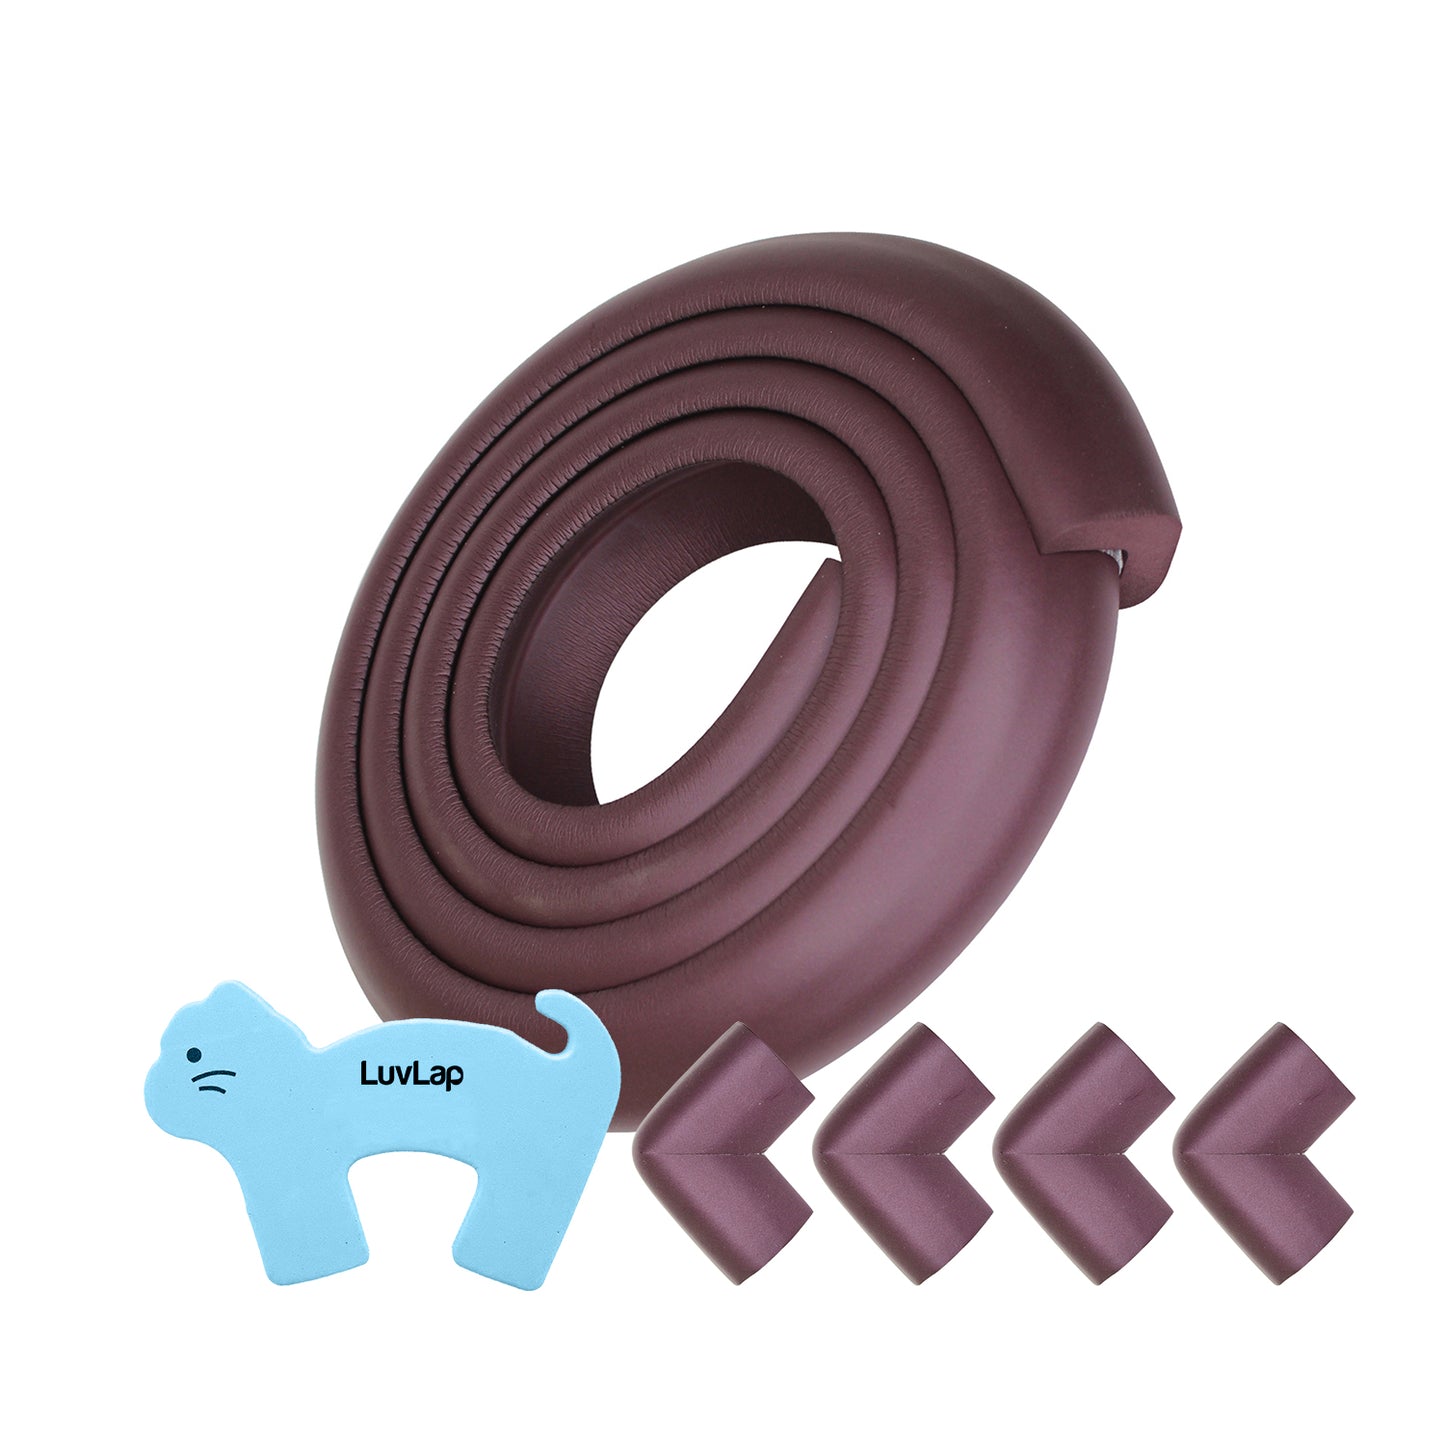 Baby Safety Combo Pack, 2 metre Edge Protector, 4 Furniture Corner Guards, One Door Stopper